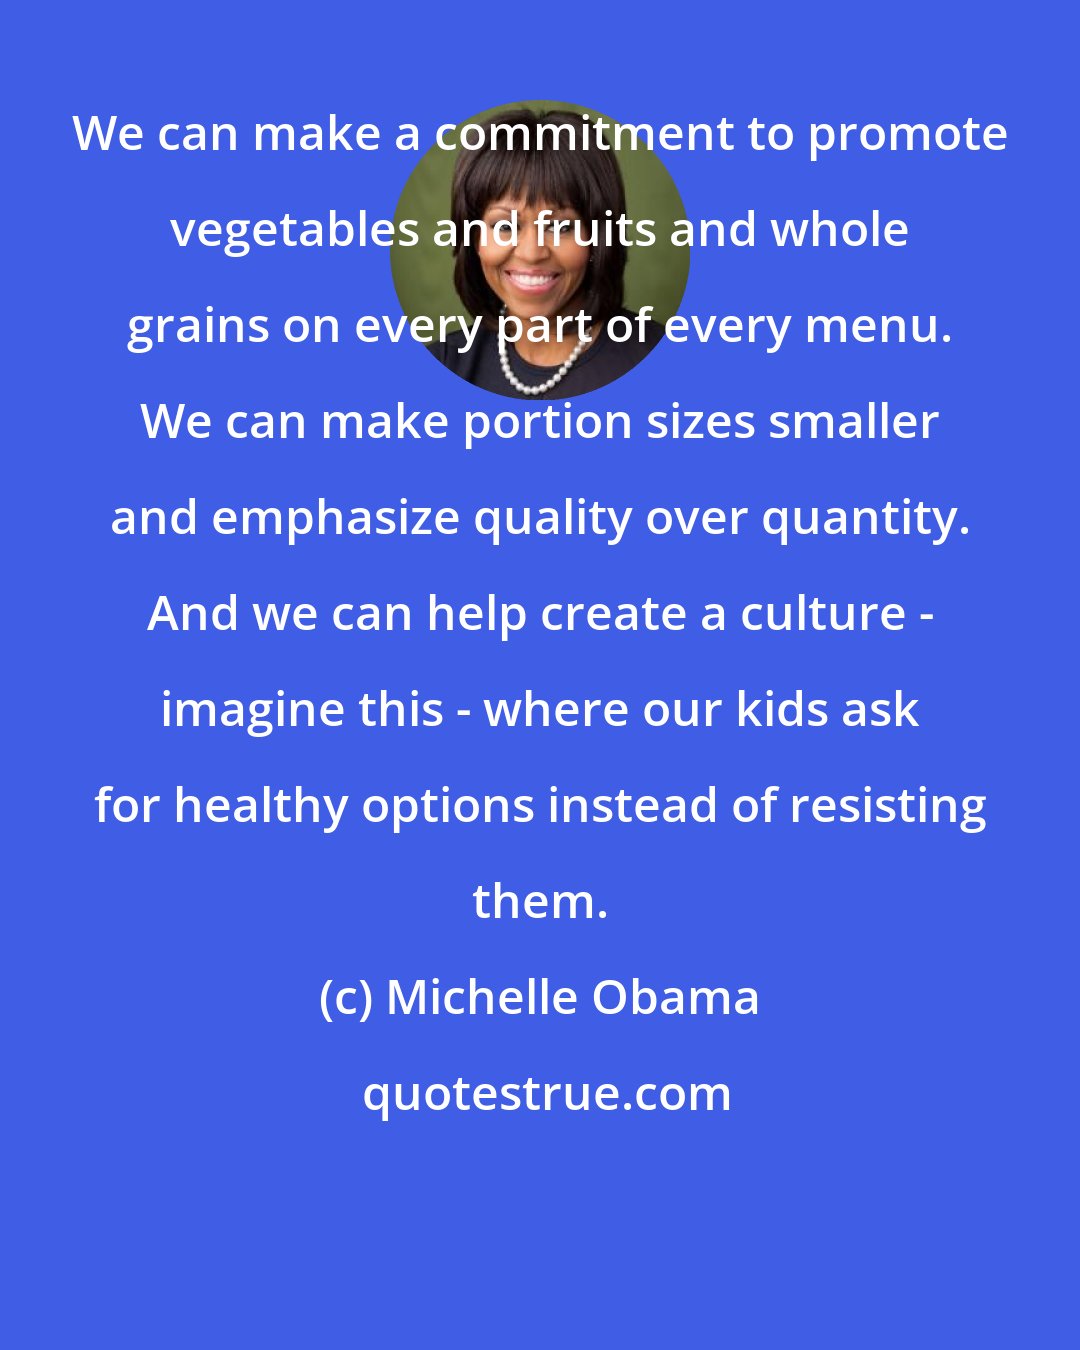 Michelle Obama: We can make a commitment to promote vegetables and fruits and whole grains on every part of every menu. We can make portion sizes smaller and emphasize quality over quantity. And we can help create a culture - imagine this - where our kids ask for healthy options instead of resisting them.